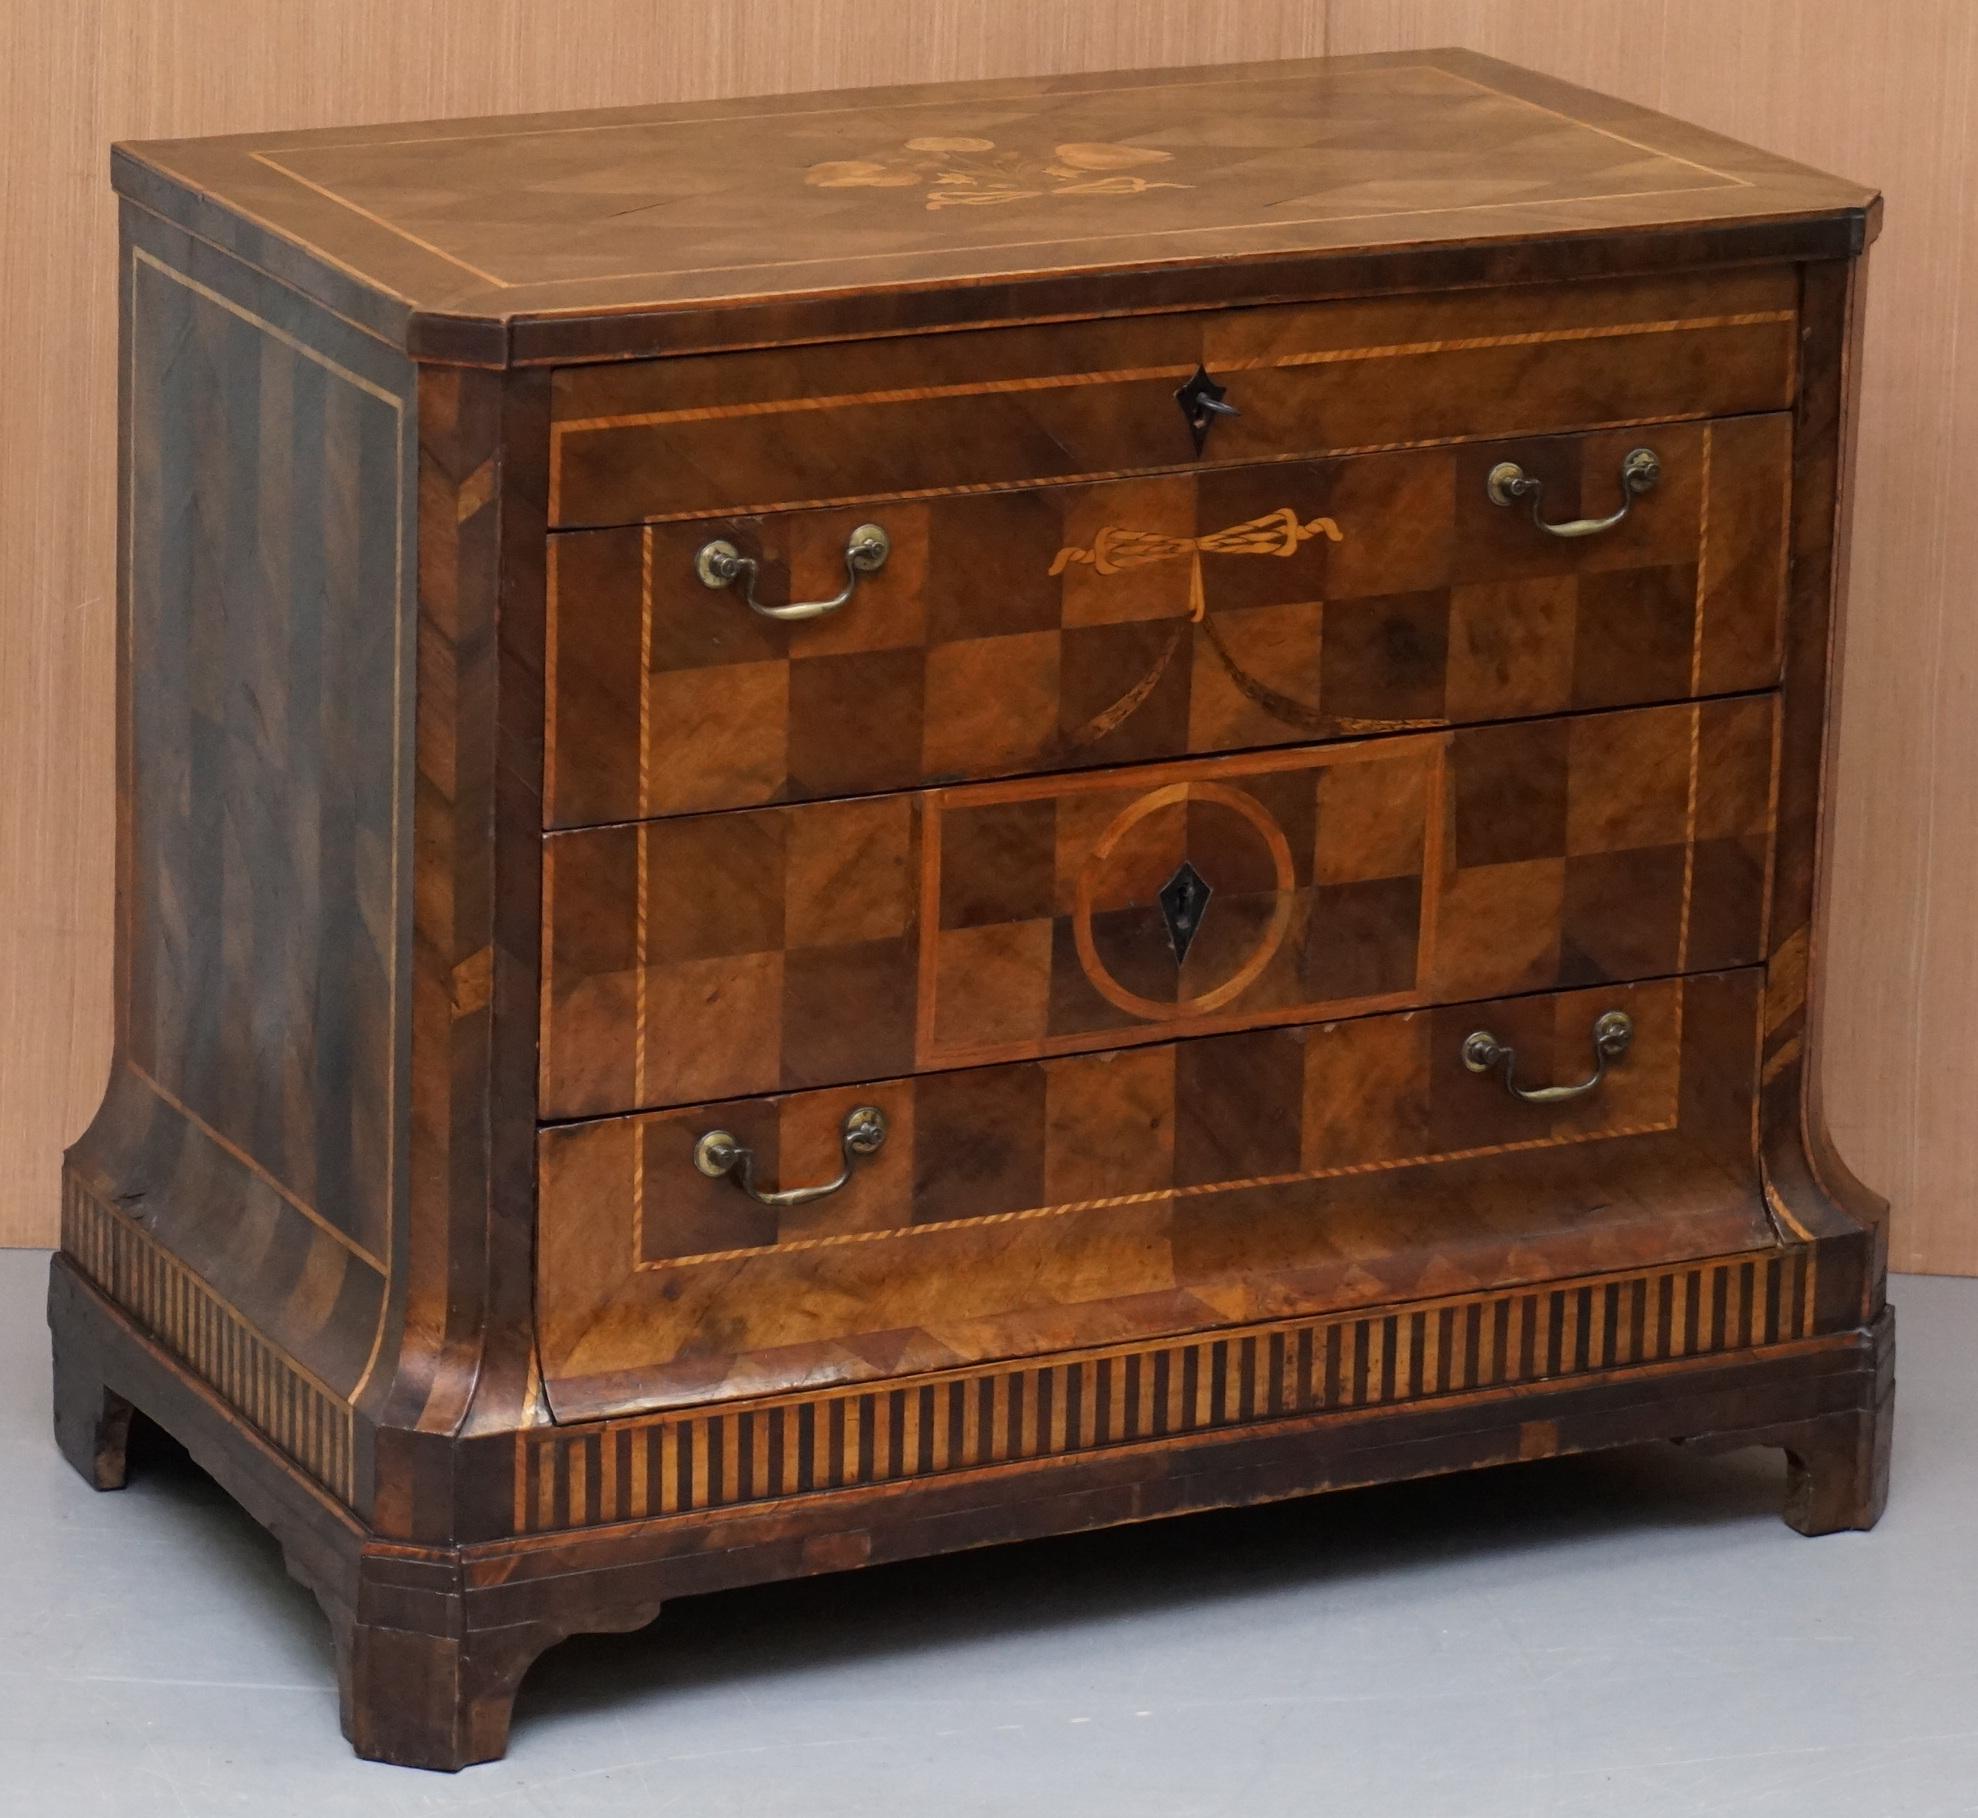 Georgian Rare circa 1780 Continental Parquetry Marquetry Inlaid Commode Chest of Drawers For Sale